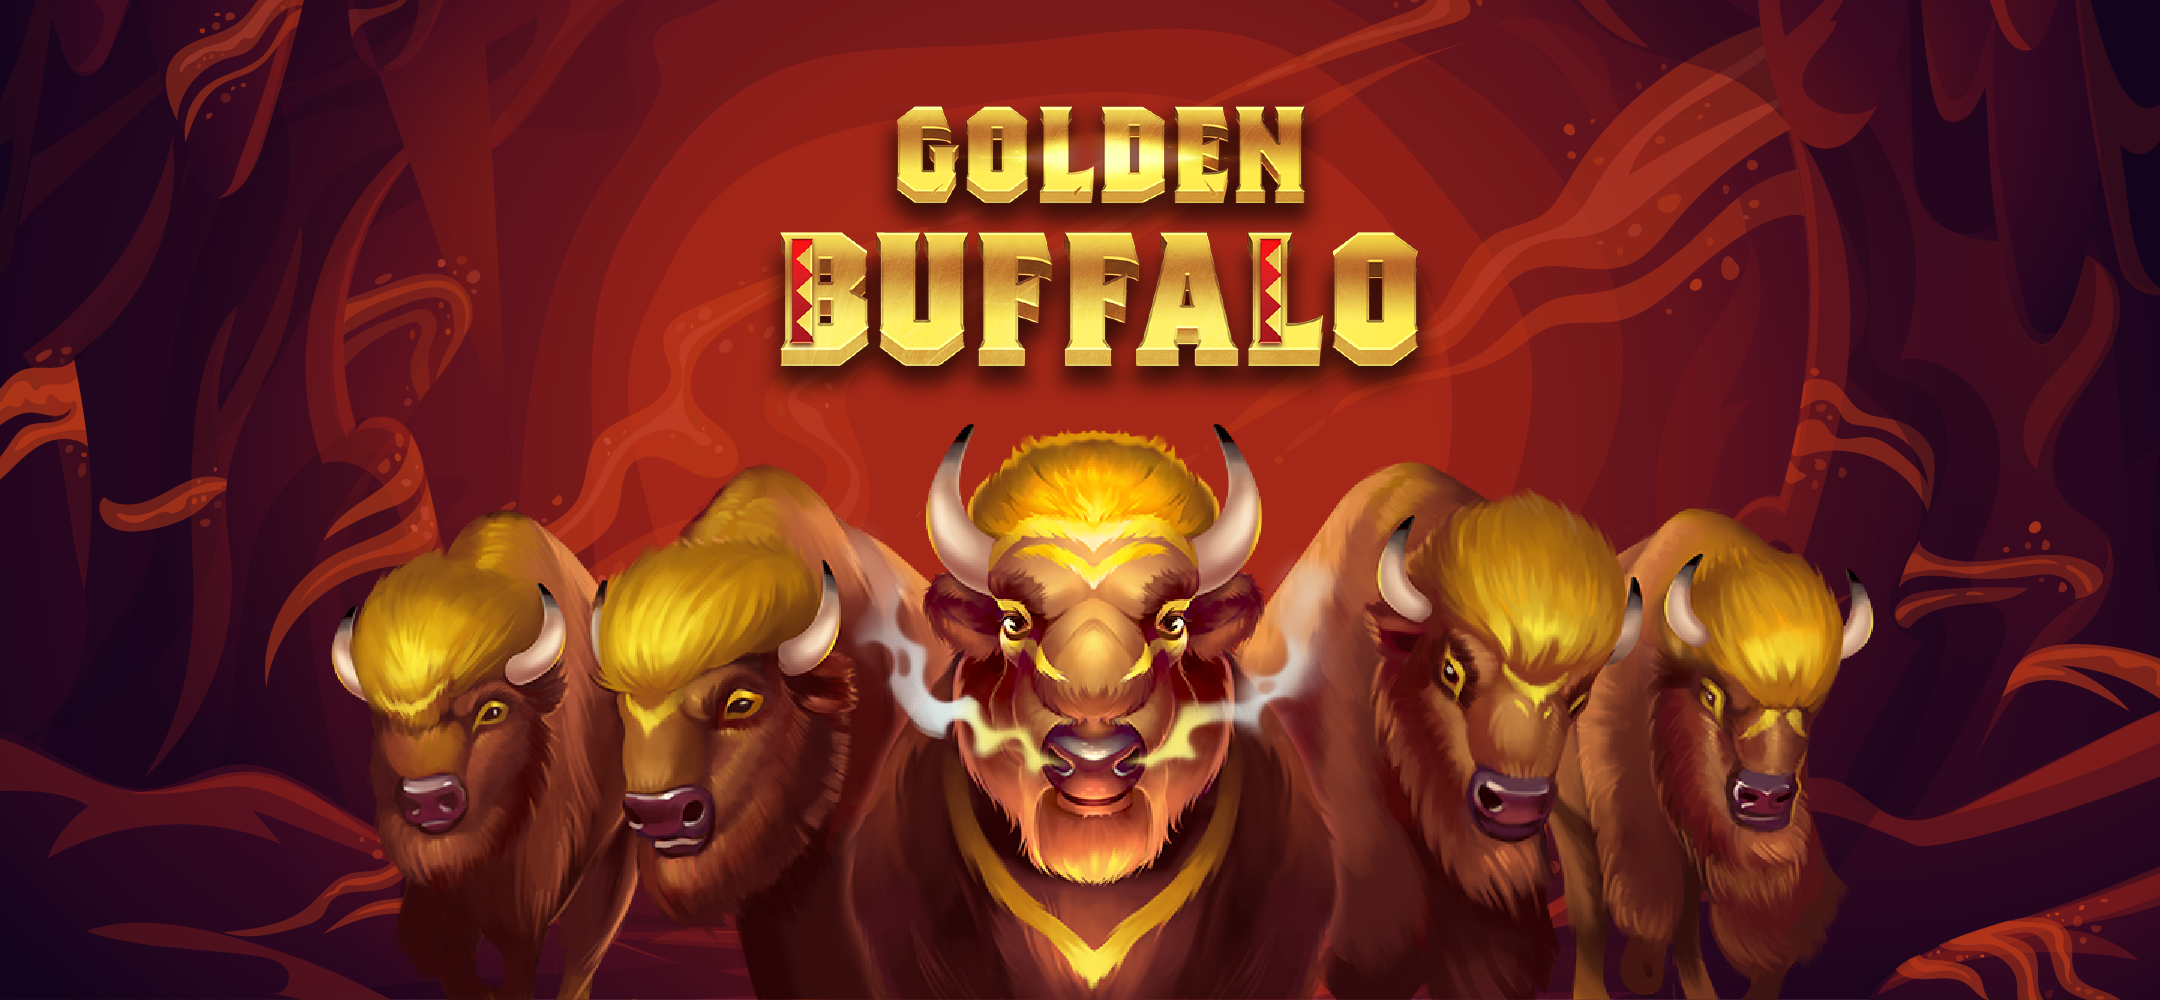 Golden Buffalo was the game played for the biggest Bodog Casino win.